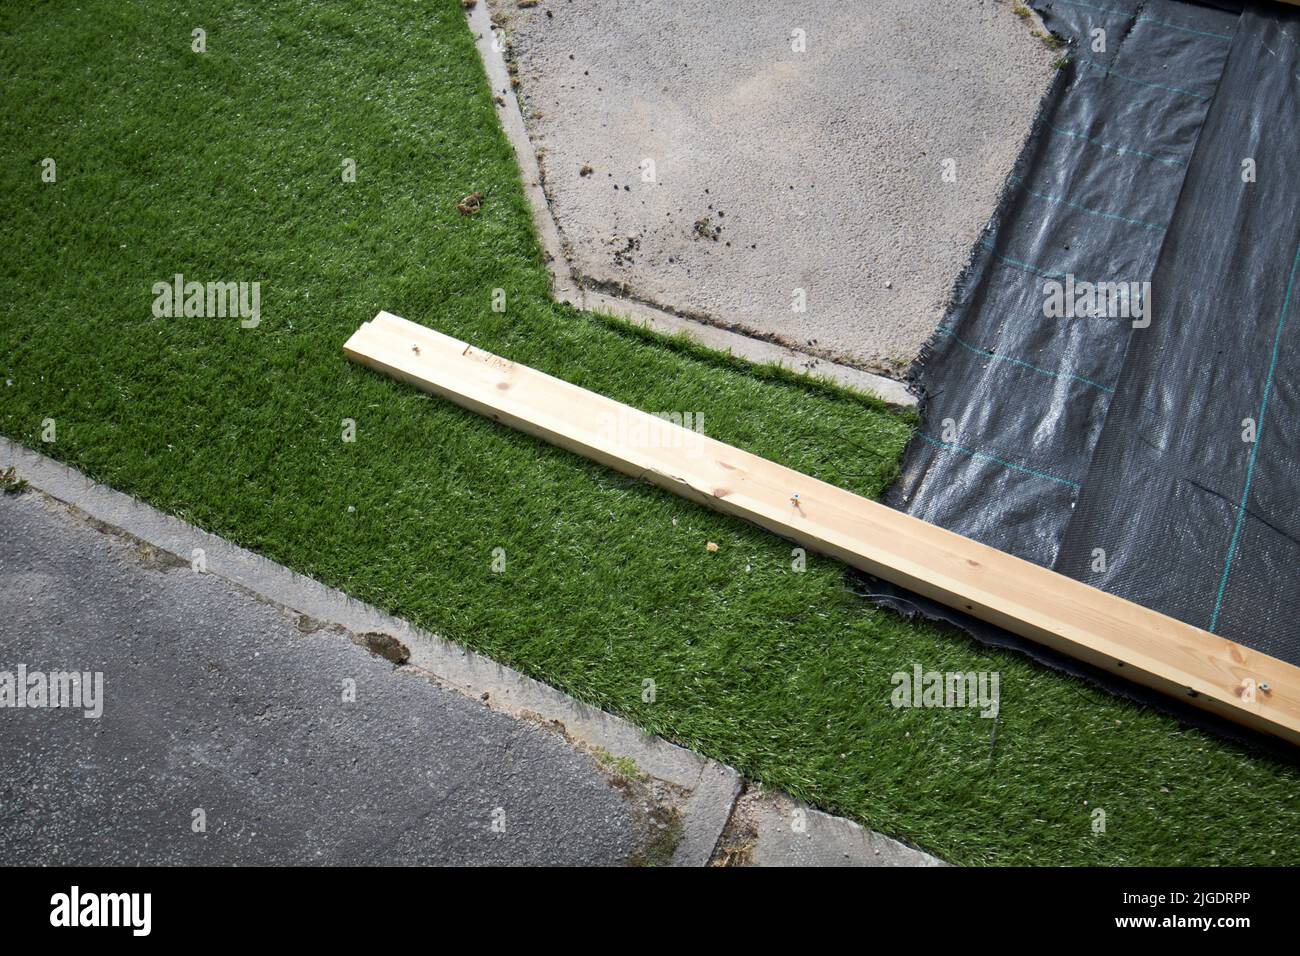 laying artificial grass in a garden in the uk Stock Photo